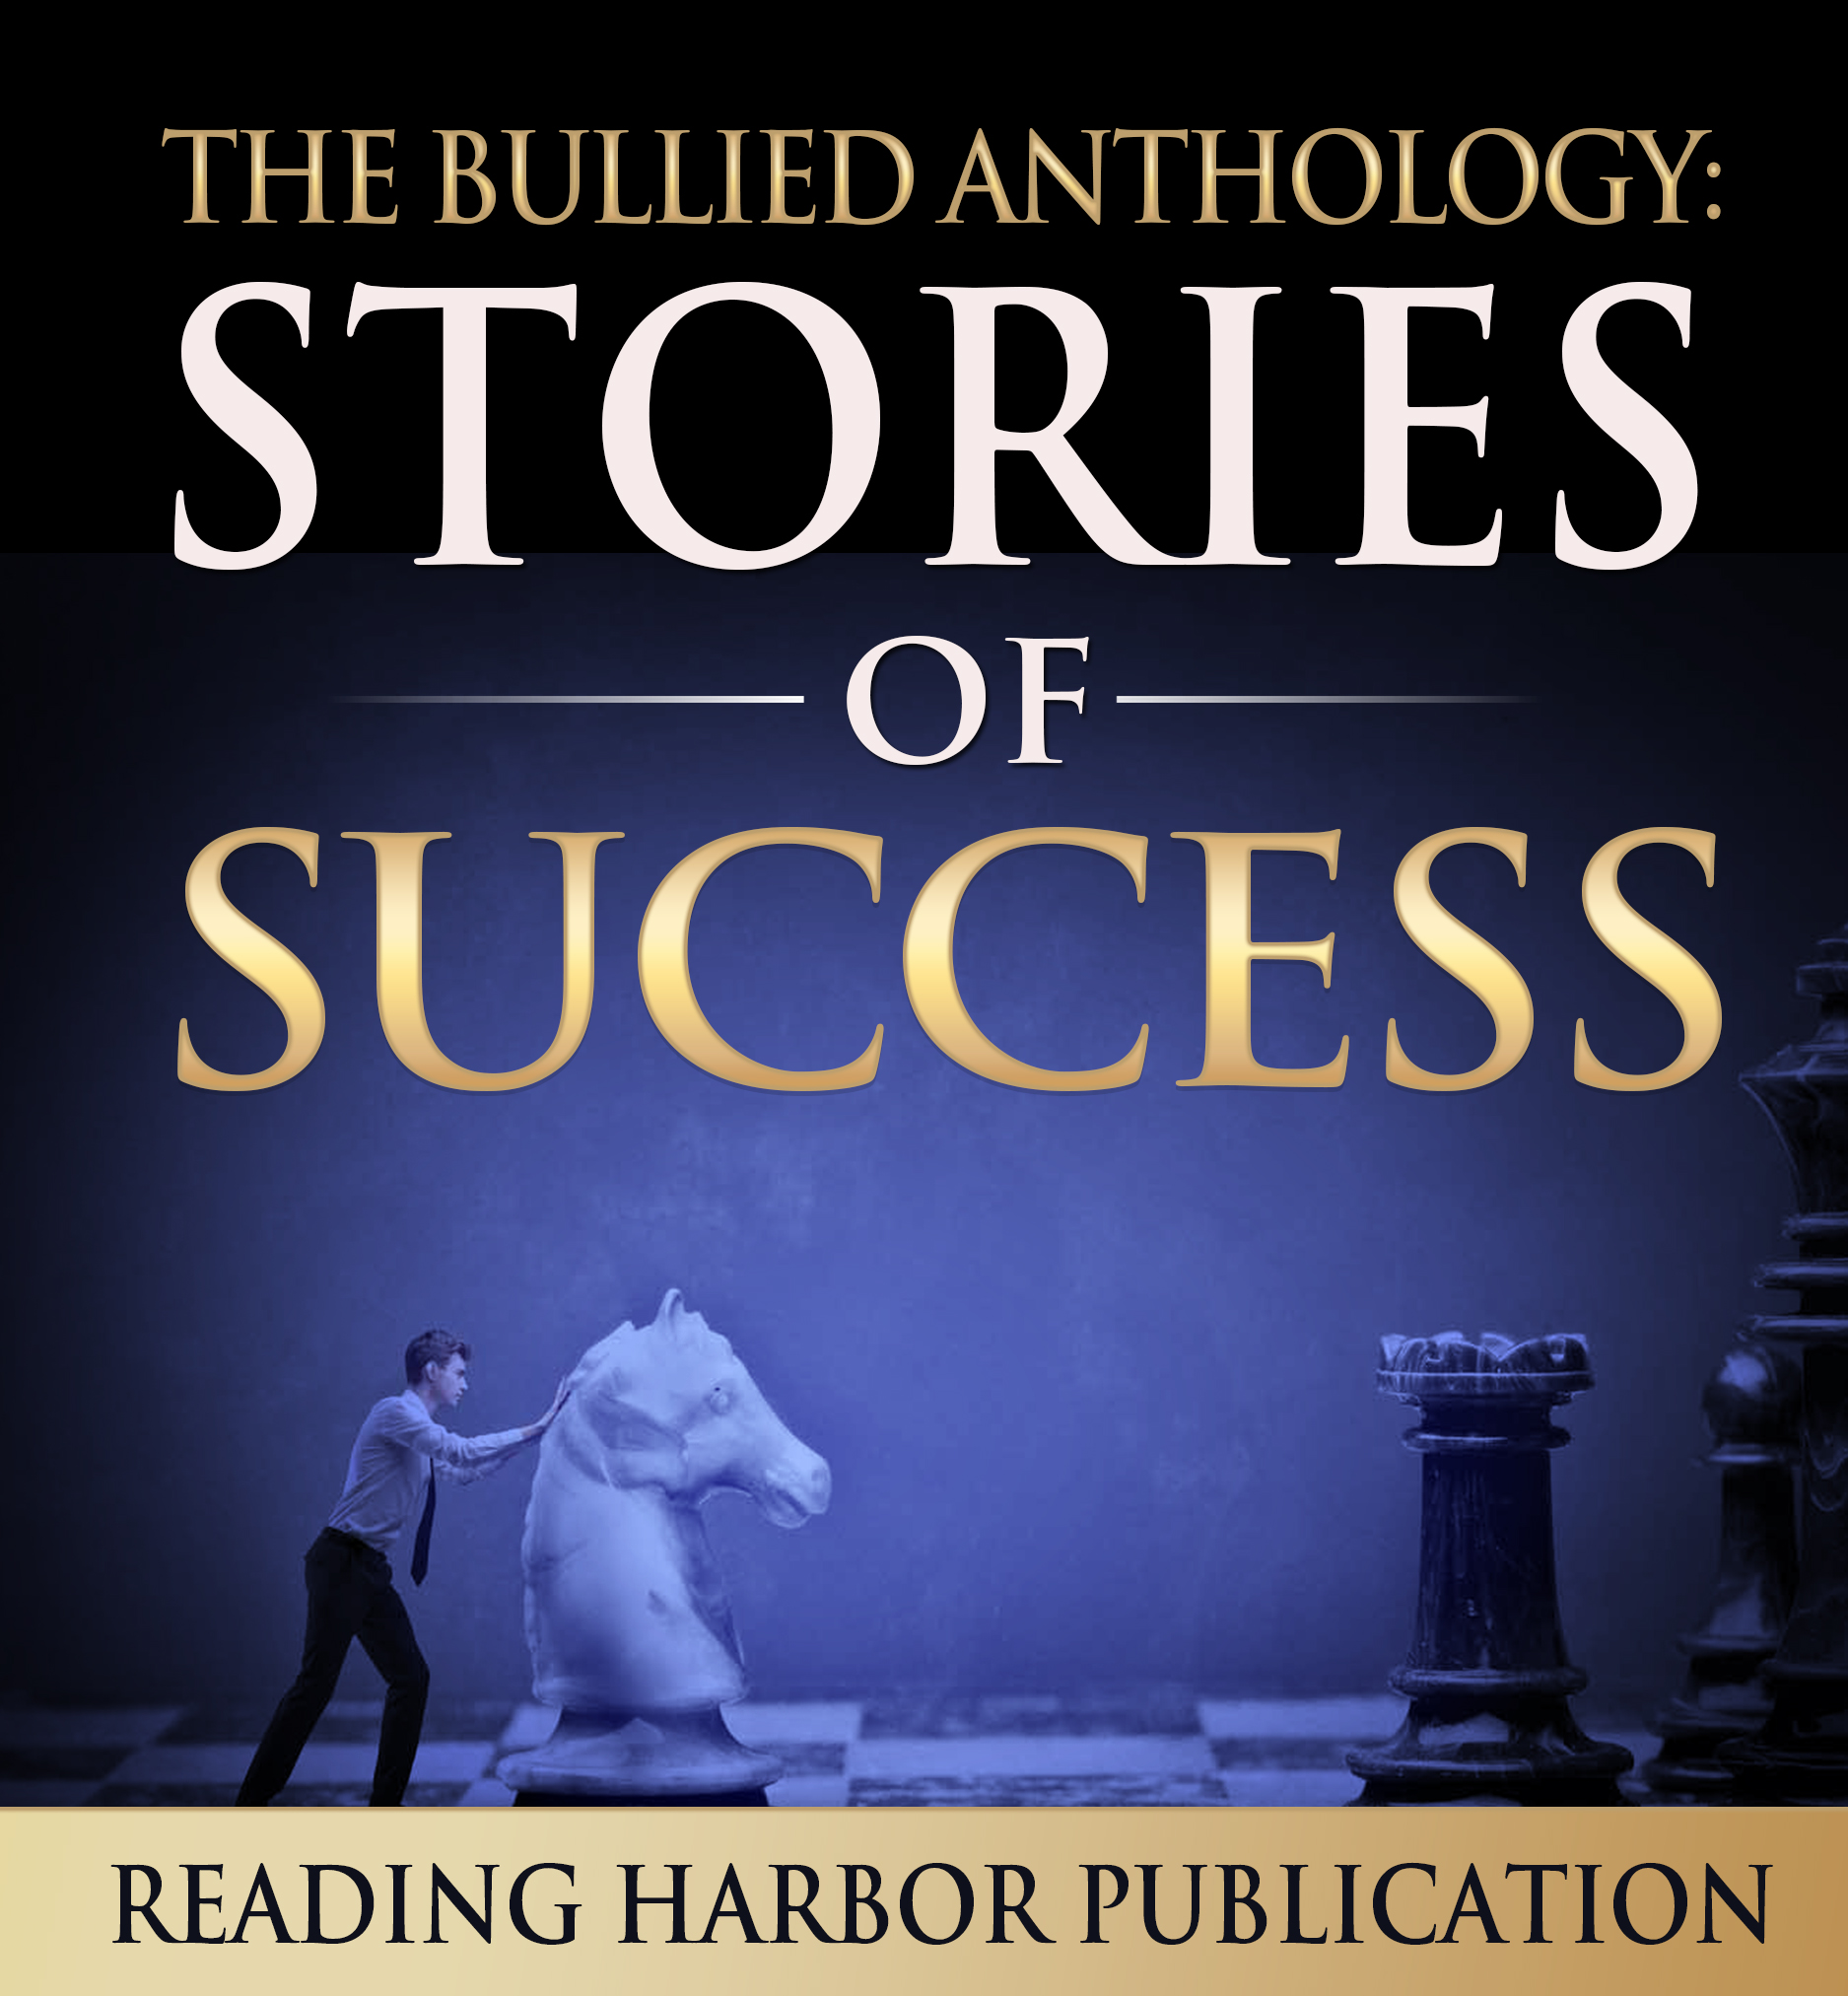 FREE: The Bullied Anthologies: Stories of Success by Reading Harbor